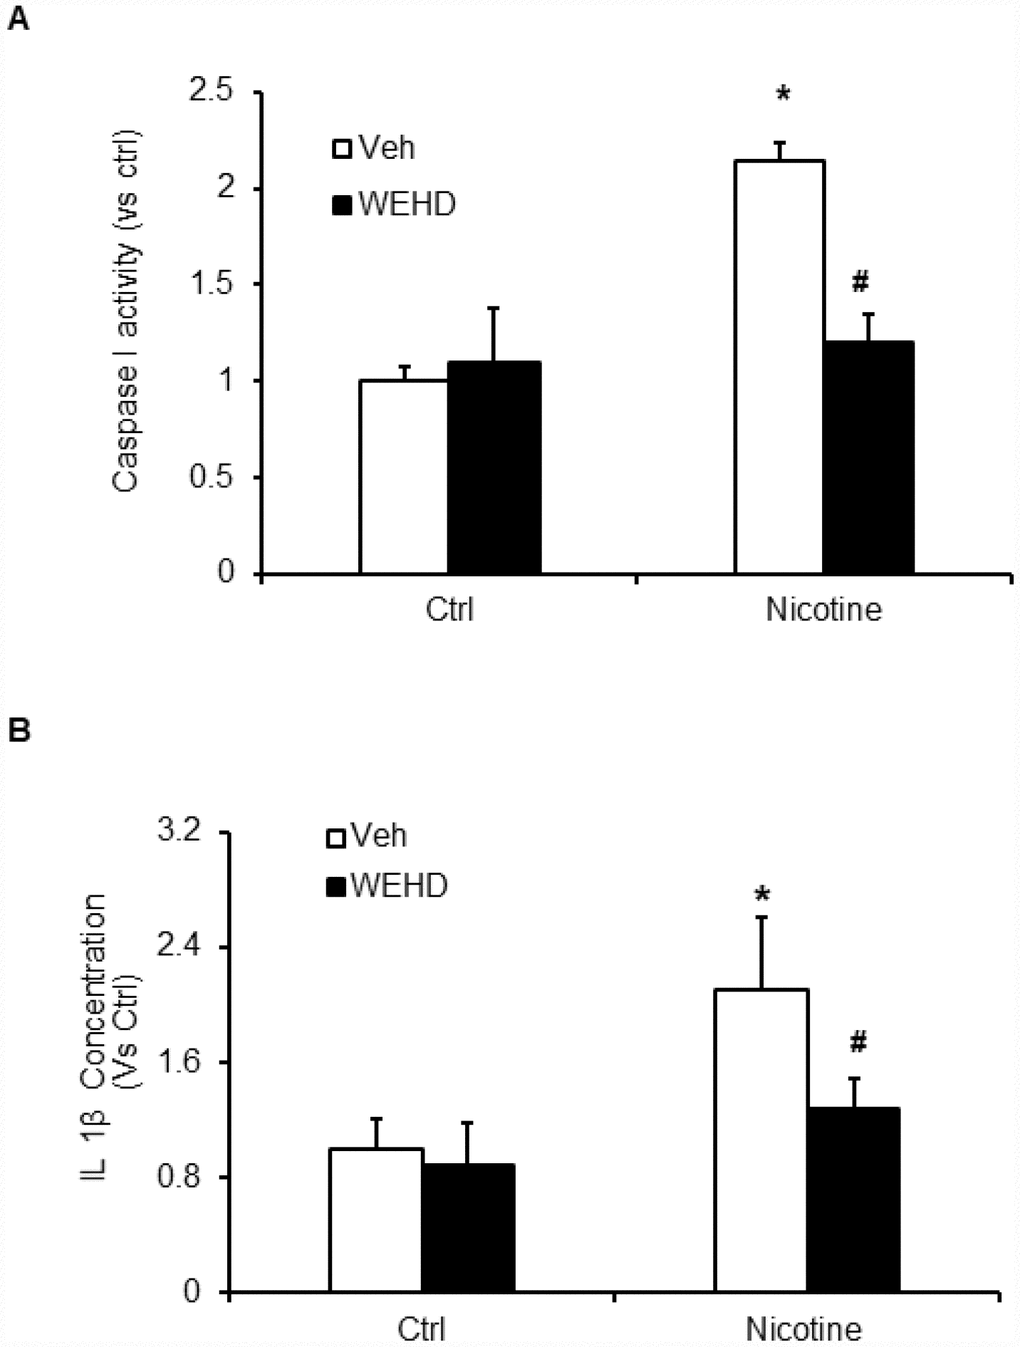 Inflammasome activation by nicotine in podocytes. Values are arithmetic means ± SEM (n=6 each group) of caspase-1 activity (A) and IL-β production (B) in podocytes with or without stimulation of nicotine and/or WEHD. *significant difference from control, #significant difference from nicotine treated group.